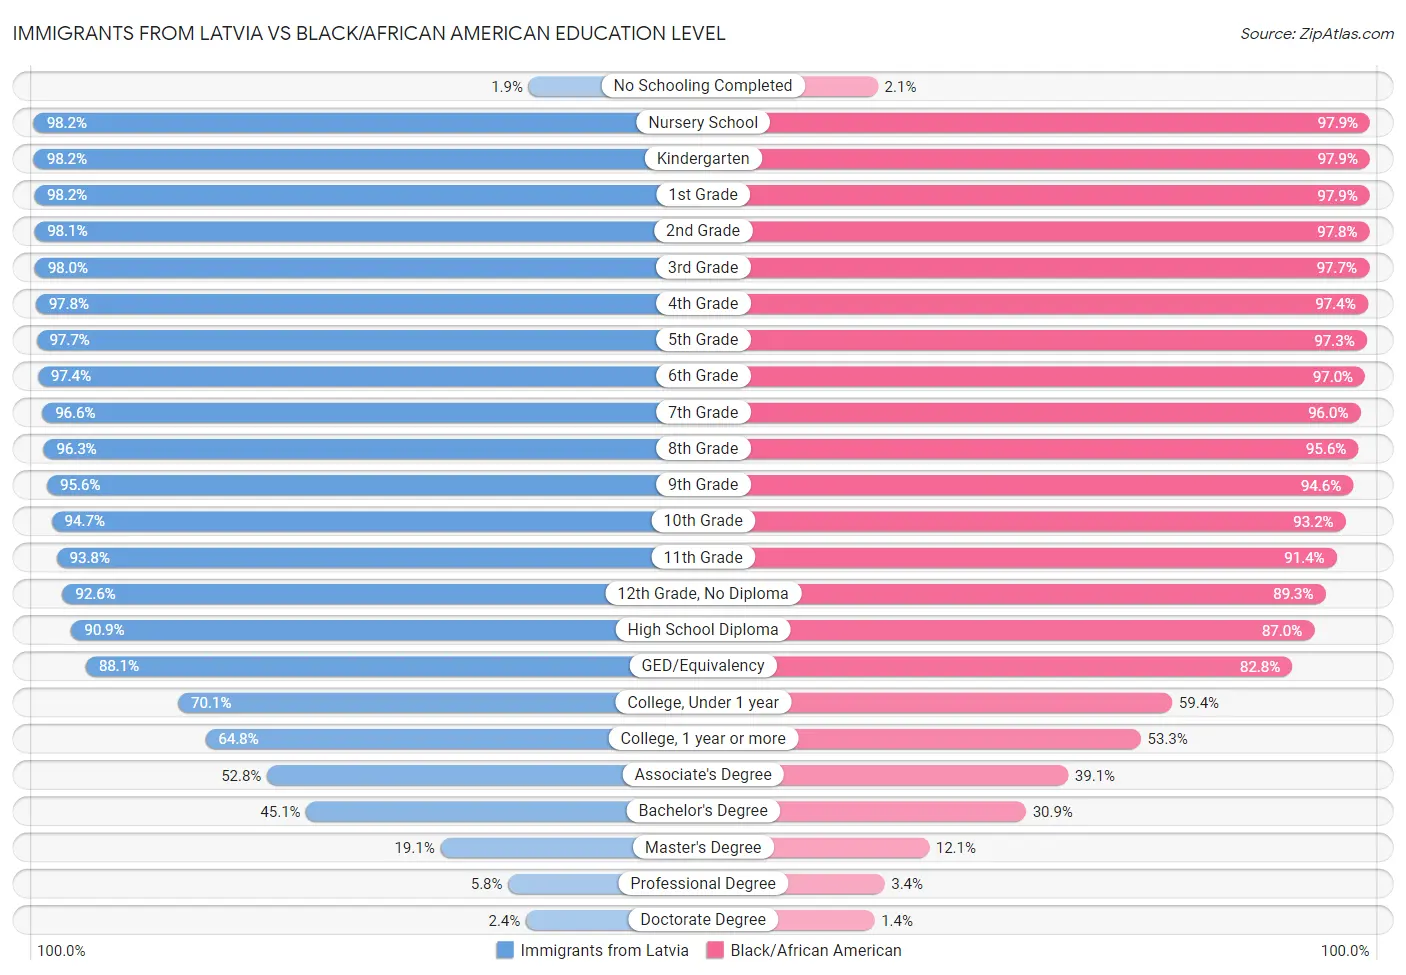 Immigrants from Latvia vs Black/African American Education Level